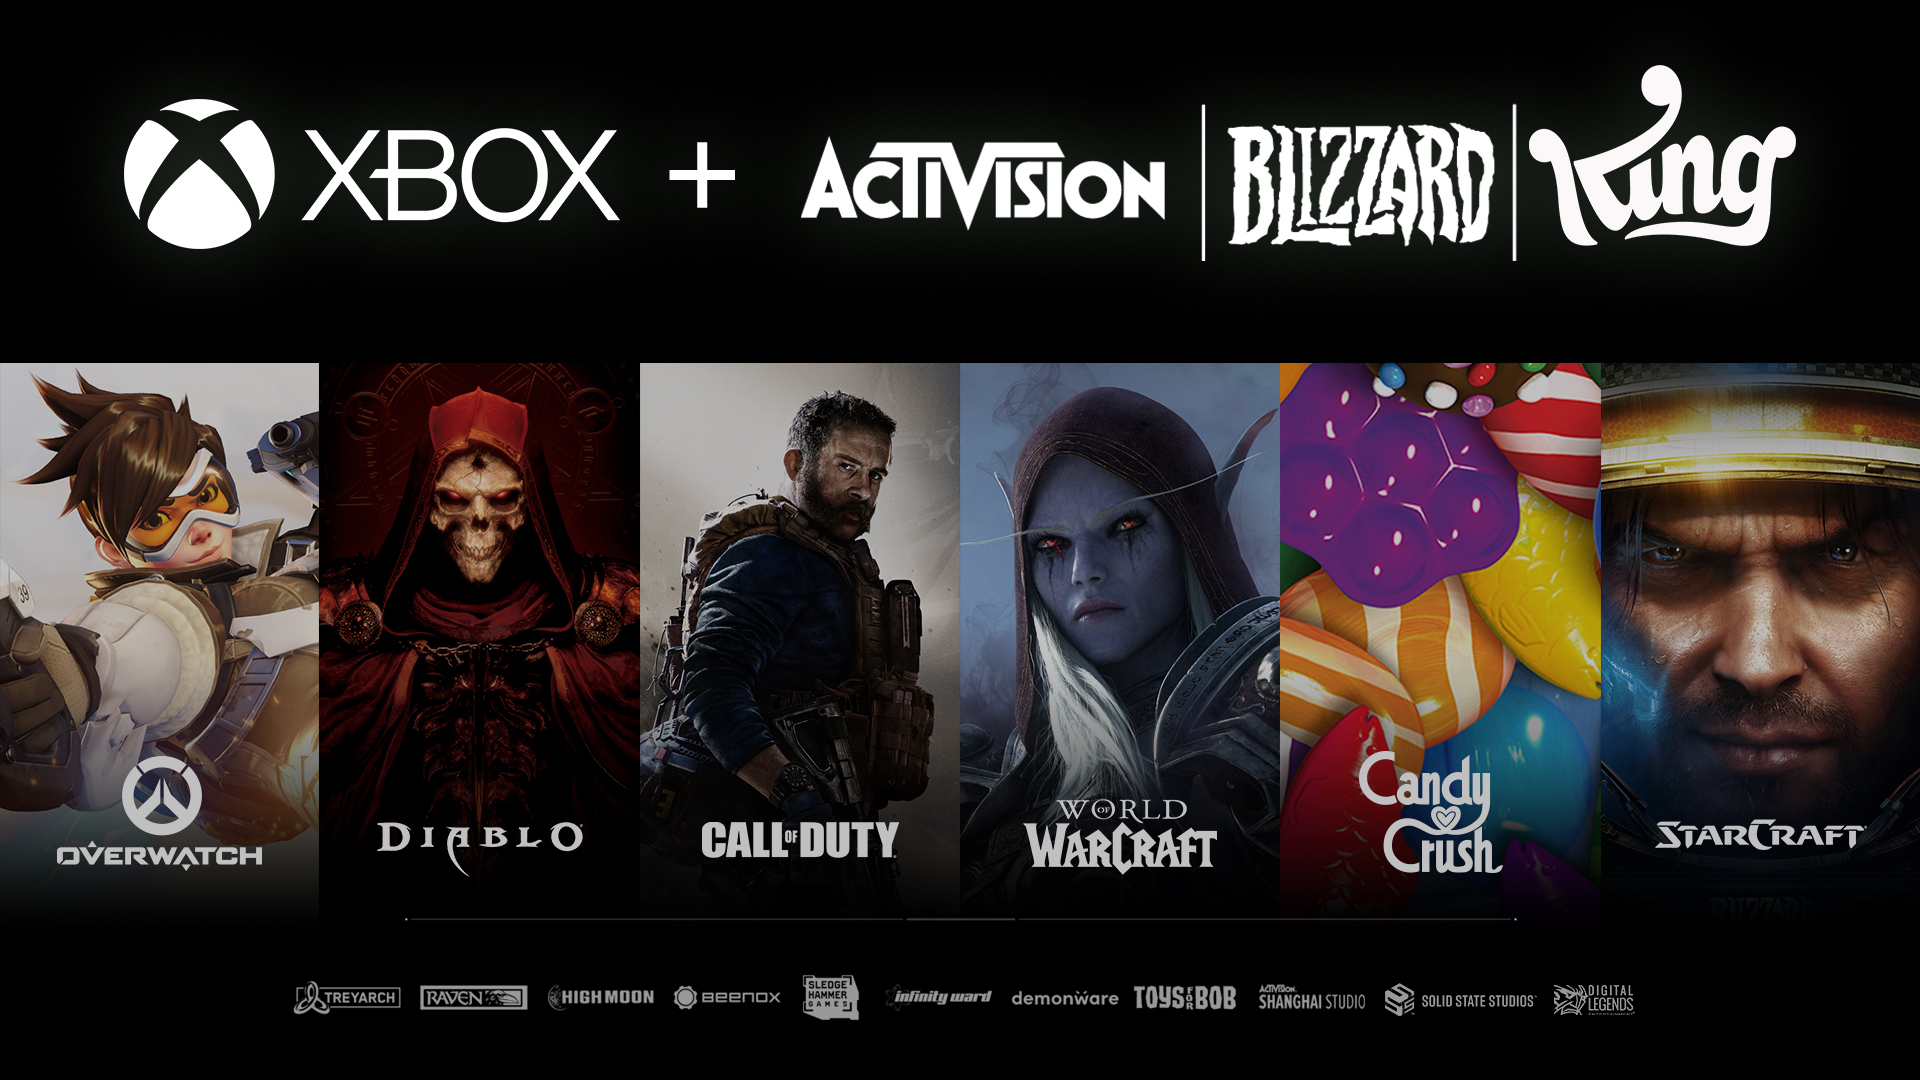 What Do You Need to Know About Microsoft's Acquisition of Activision Blizzard?